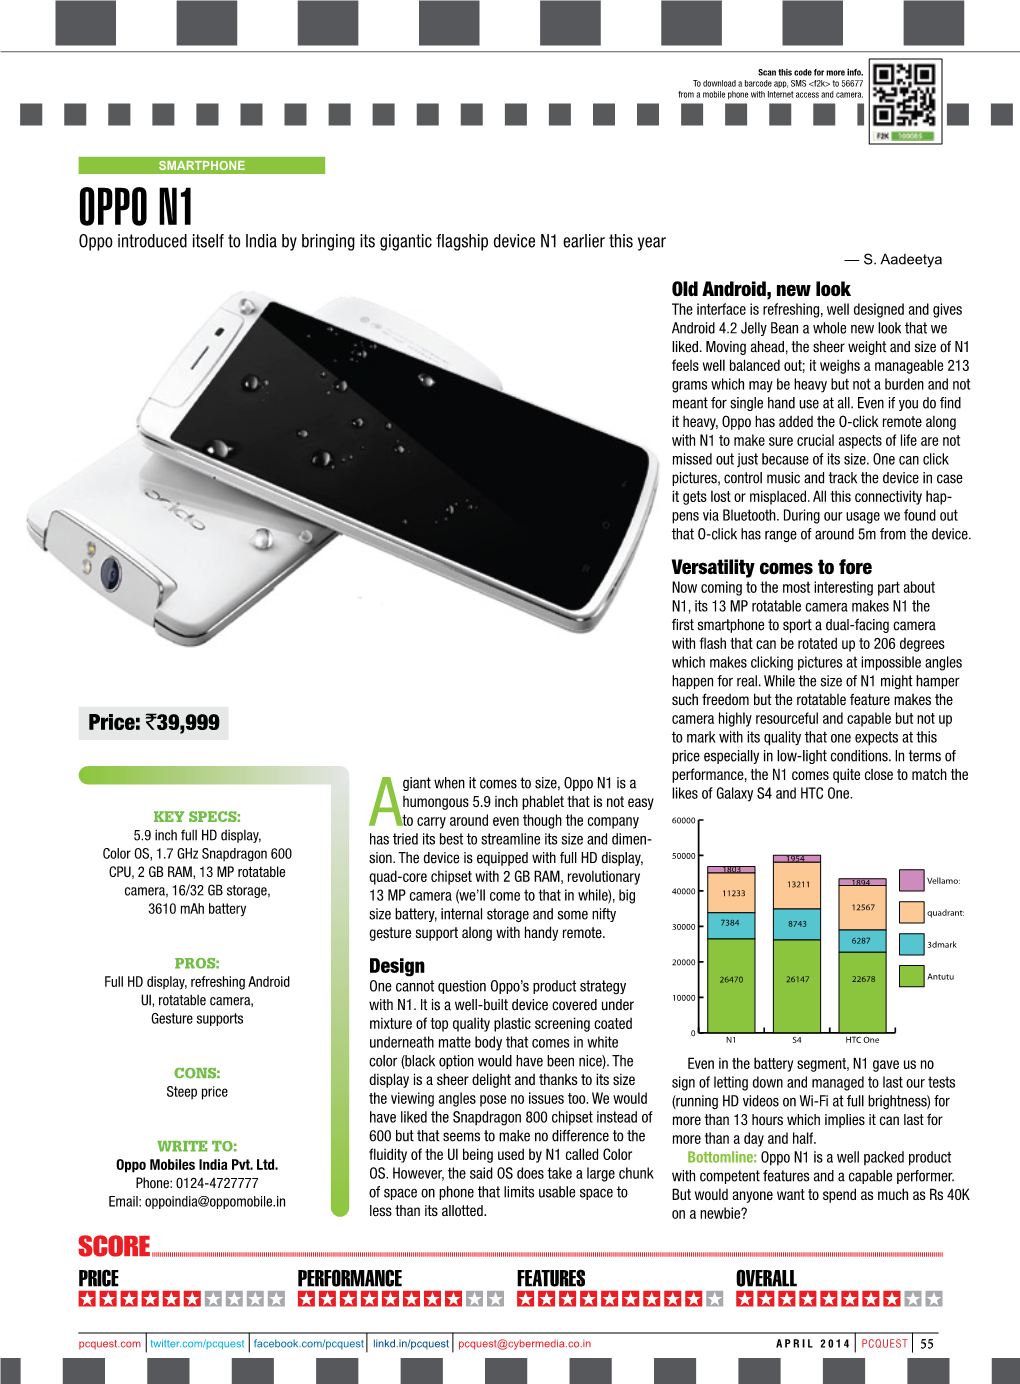 Smartphone Oppo N1 Oppo Introduced Itself to India by Bringing Its Gigantic Flagship Device N1 Earlier This Year — S